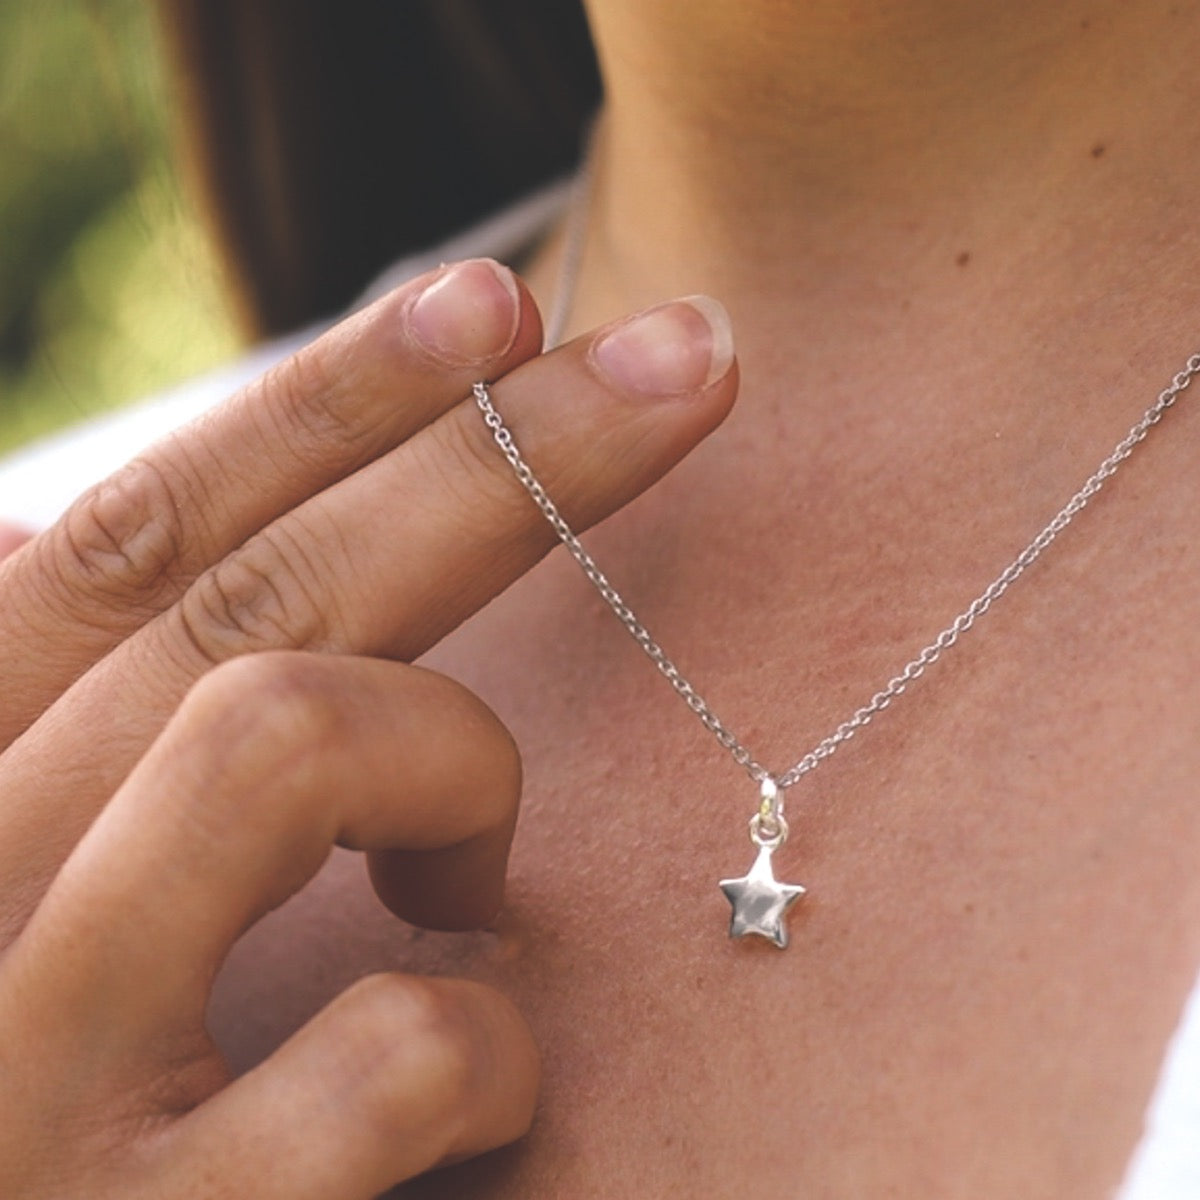 Solid silver star necklace 